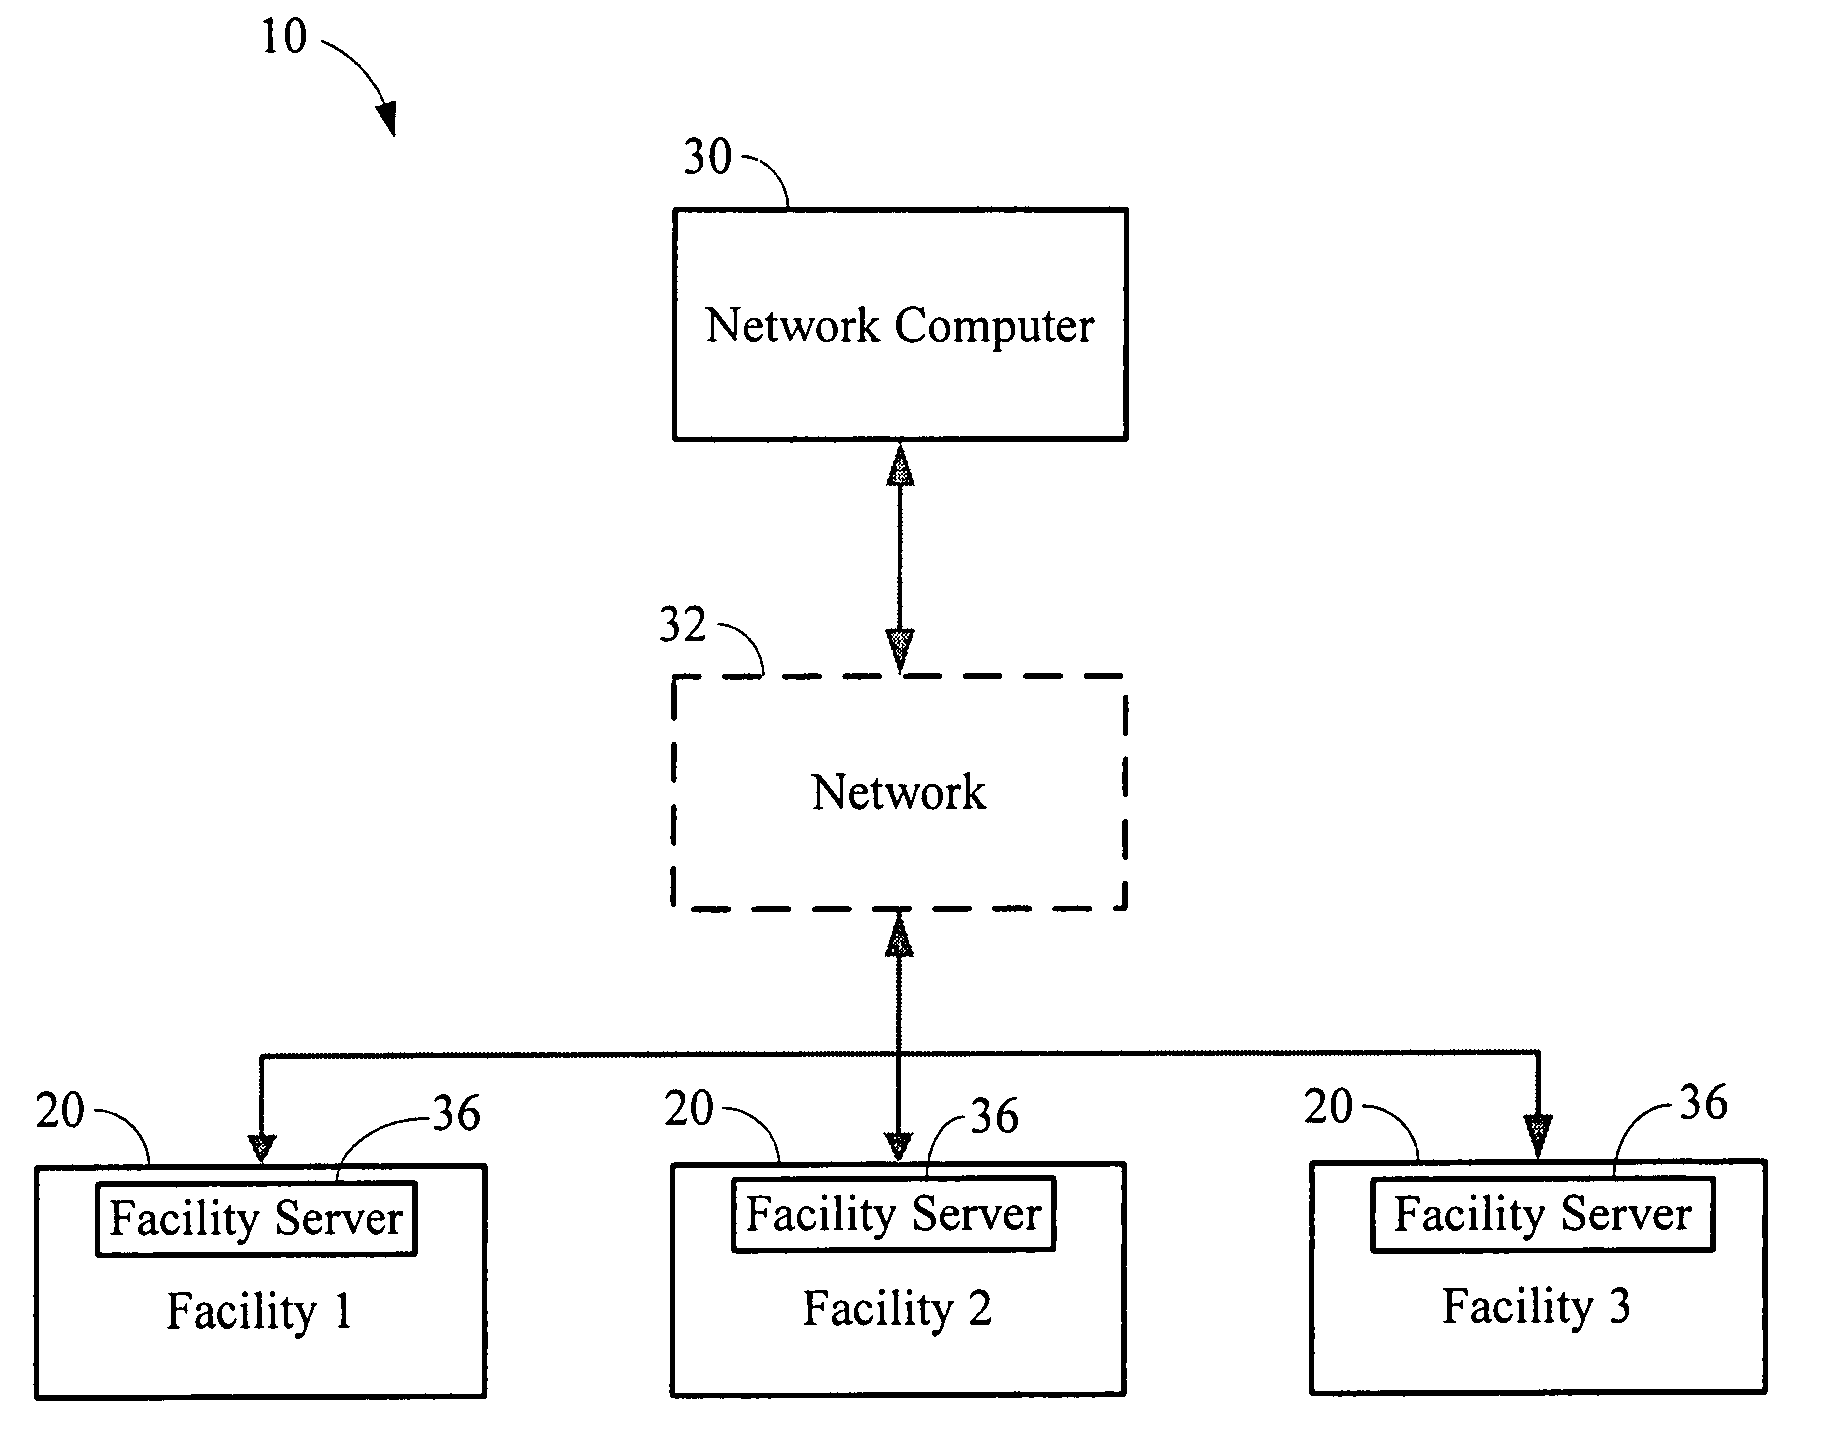 System for separating and distributing pharmacy order processing for specialty medication